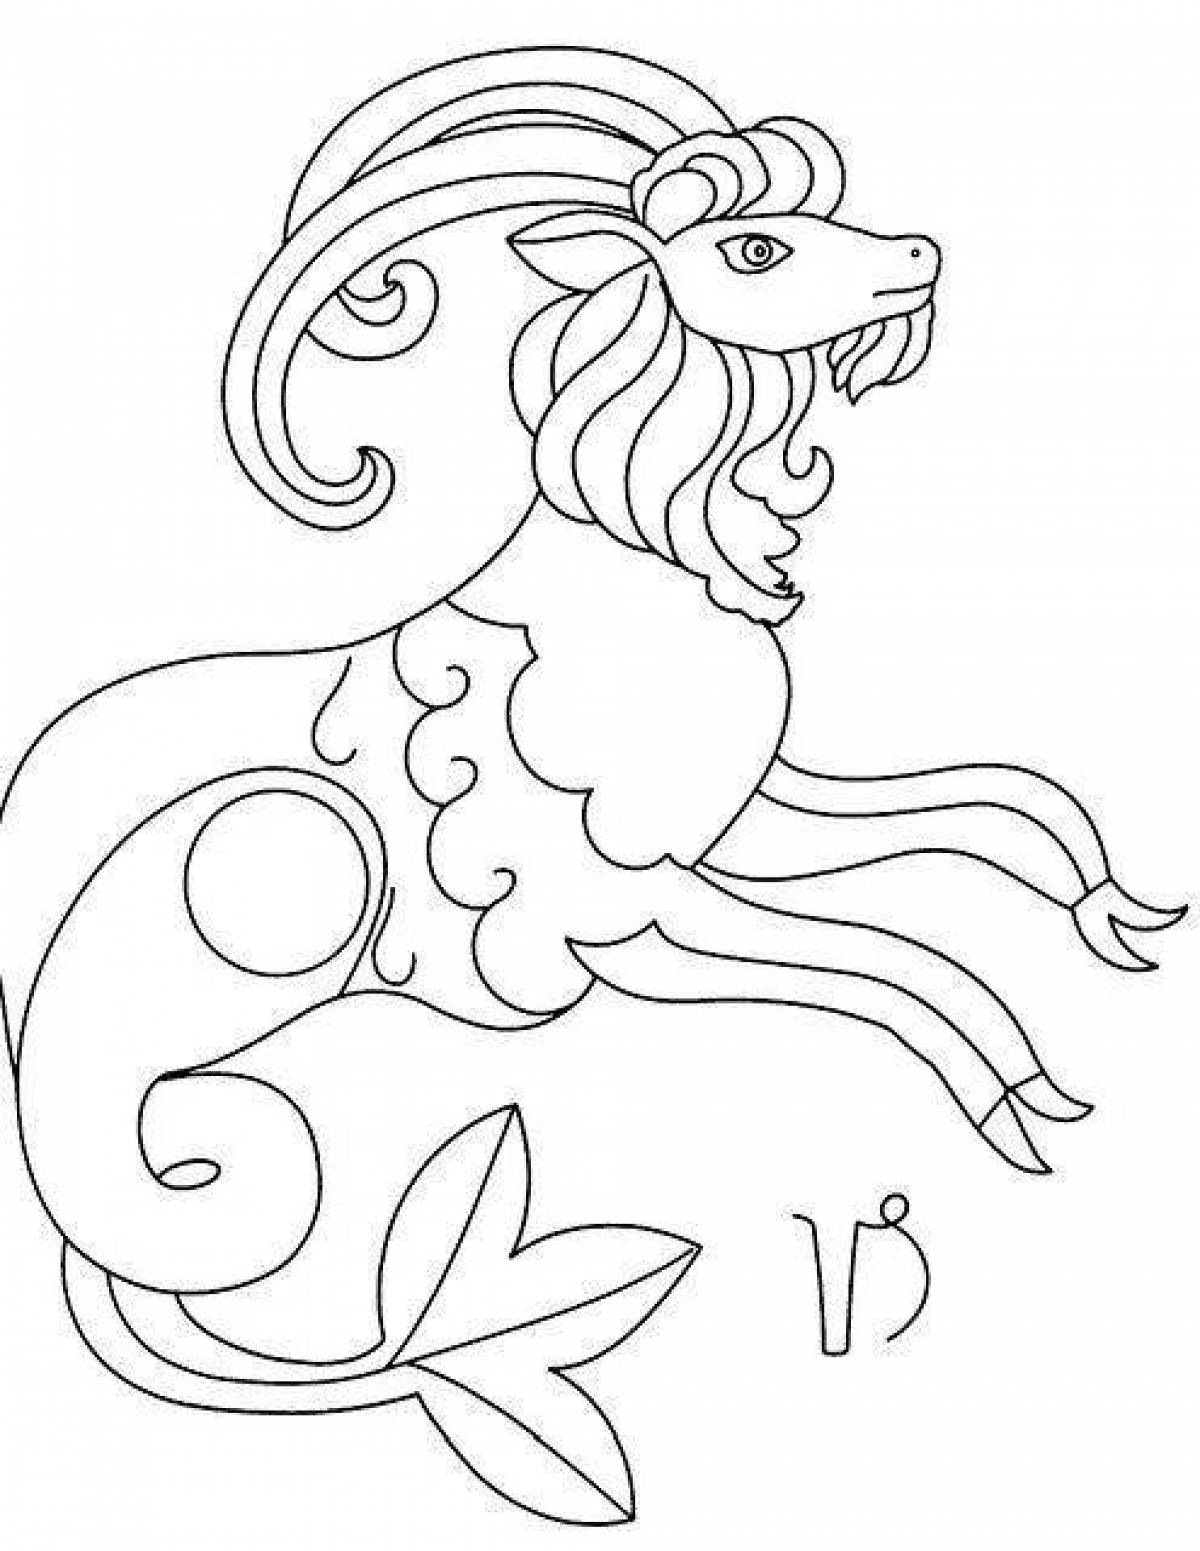 Coloring book cheerful capricorn